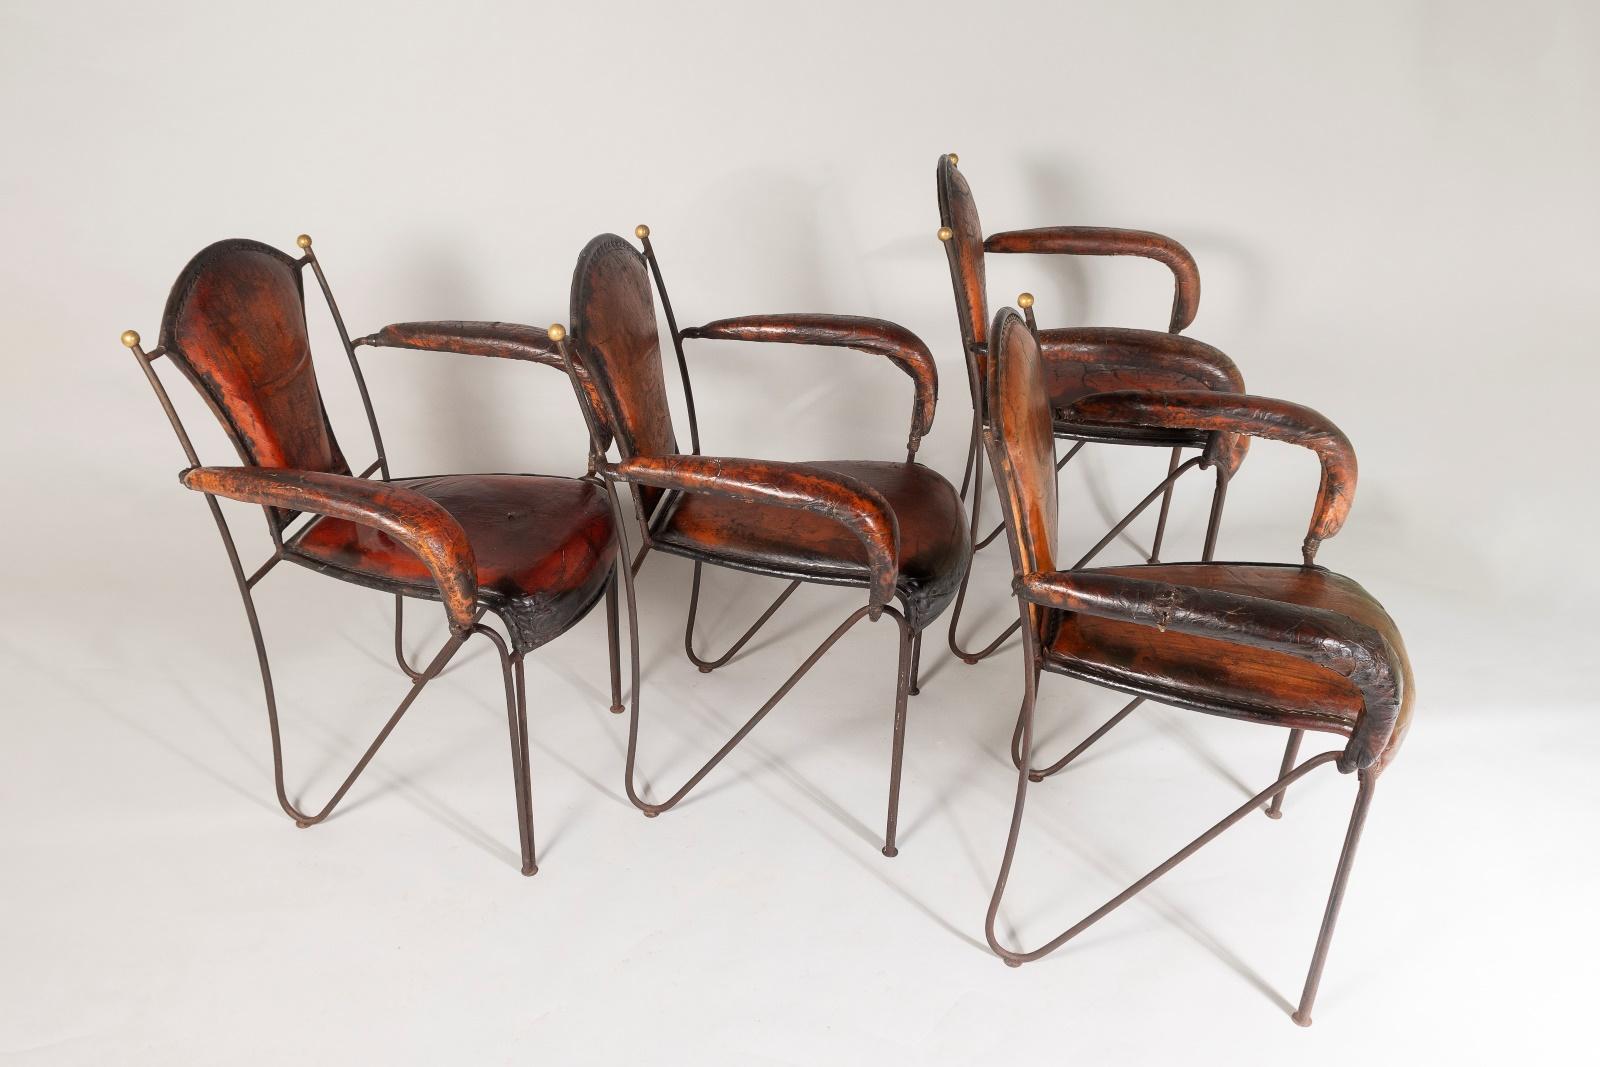 French 1950s Jacques Adnet Hand Stitched Leather Iron Armchairs - Set of 4 In Fair Condition For Sale In Llanbrynmair, GB